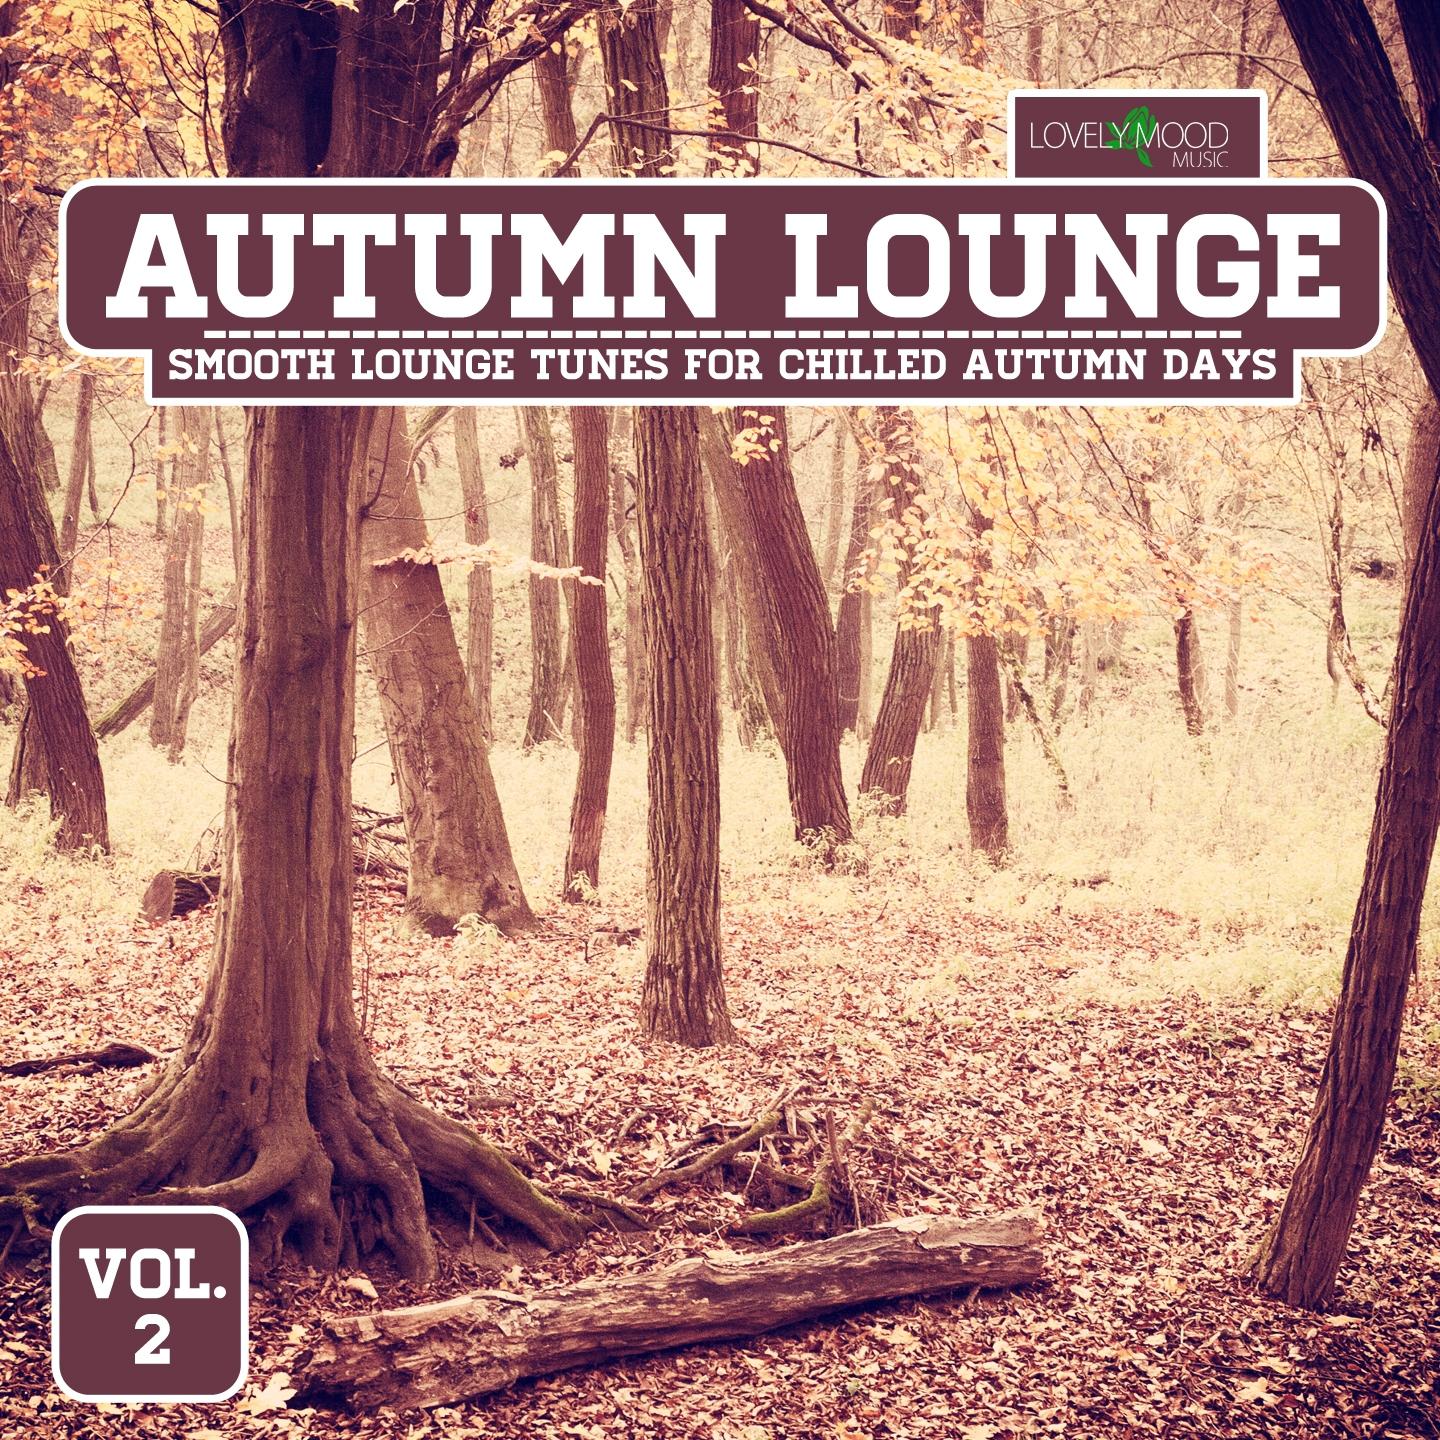 Autumn Lounge, Vol. 2 - Smooth Lounge Tunes for Chilled Autumn Days